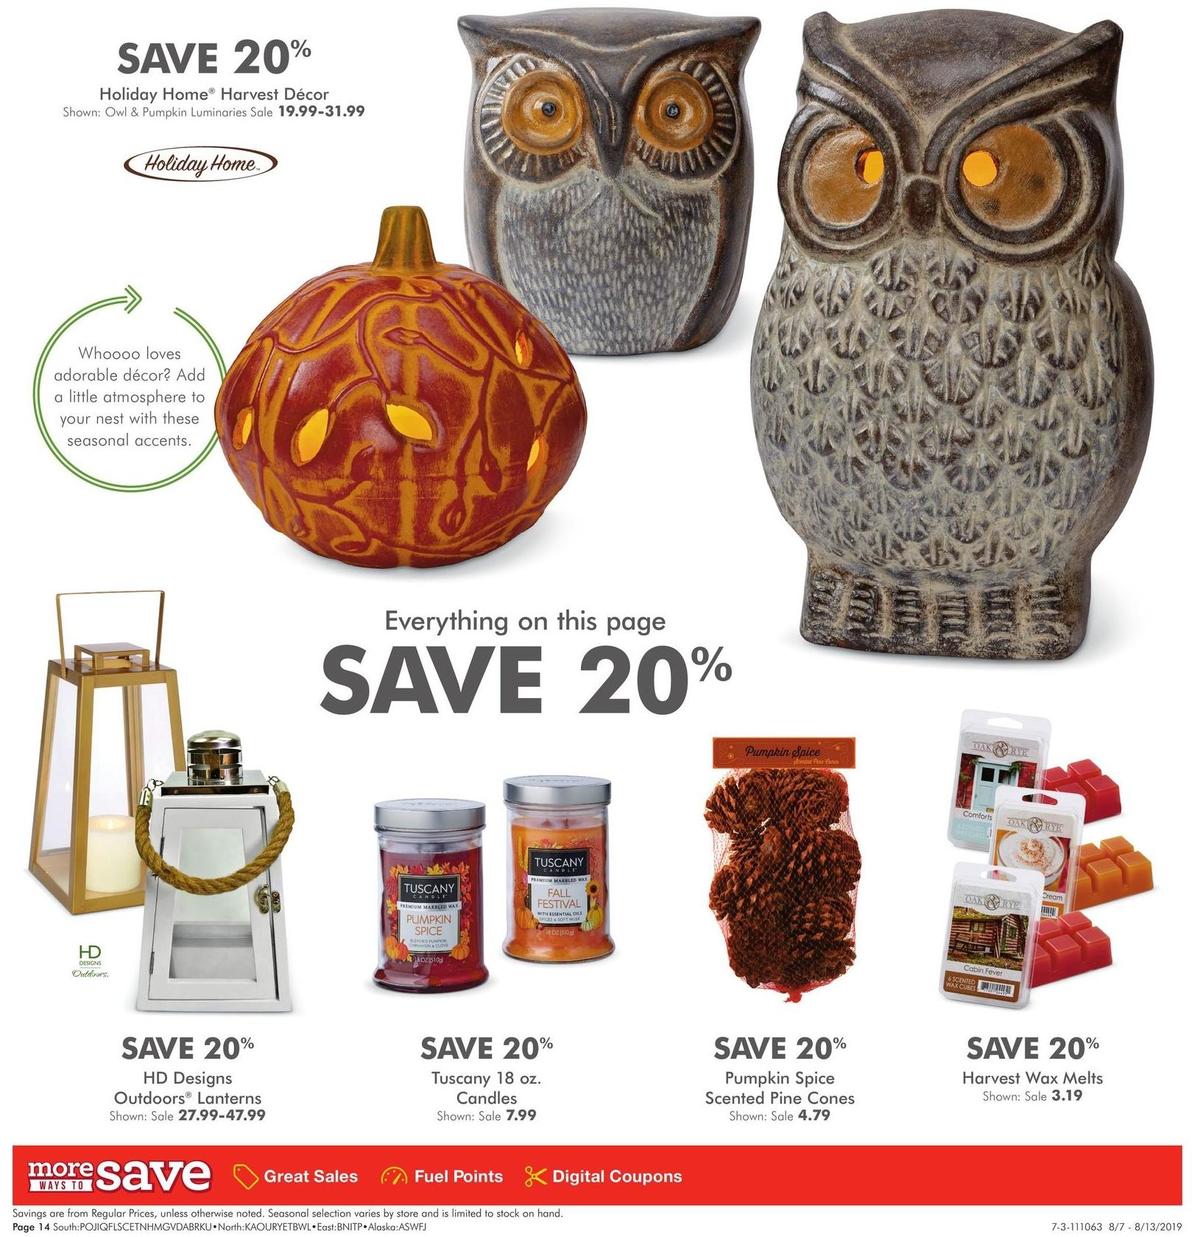 Fred Meyer General Merchandise Weekly Ad from August 7